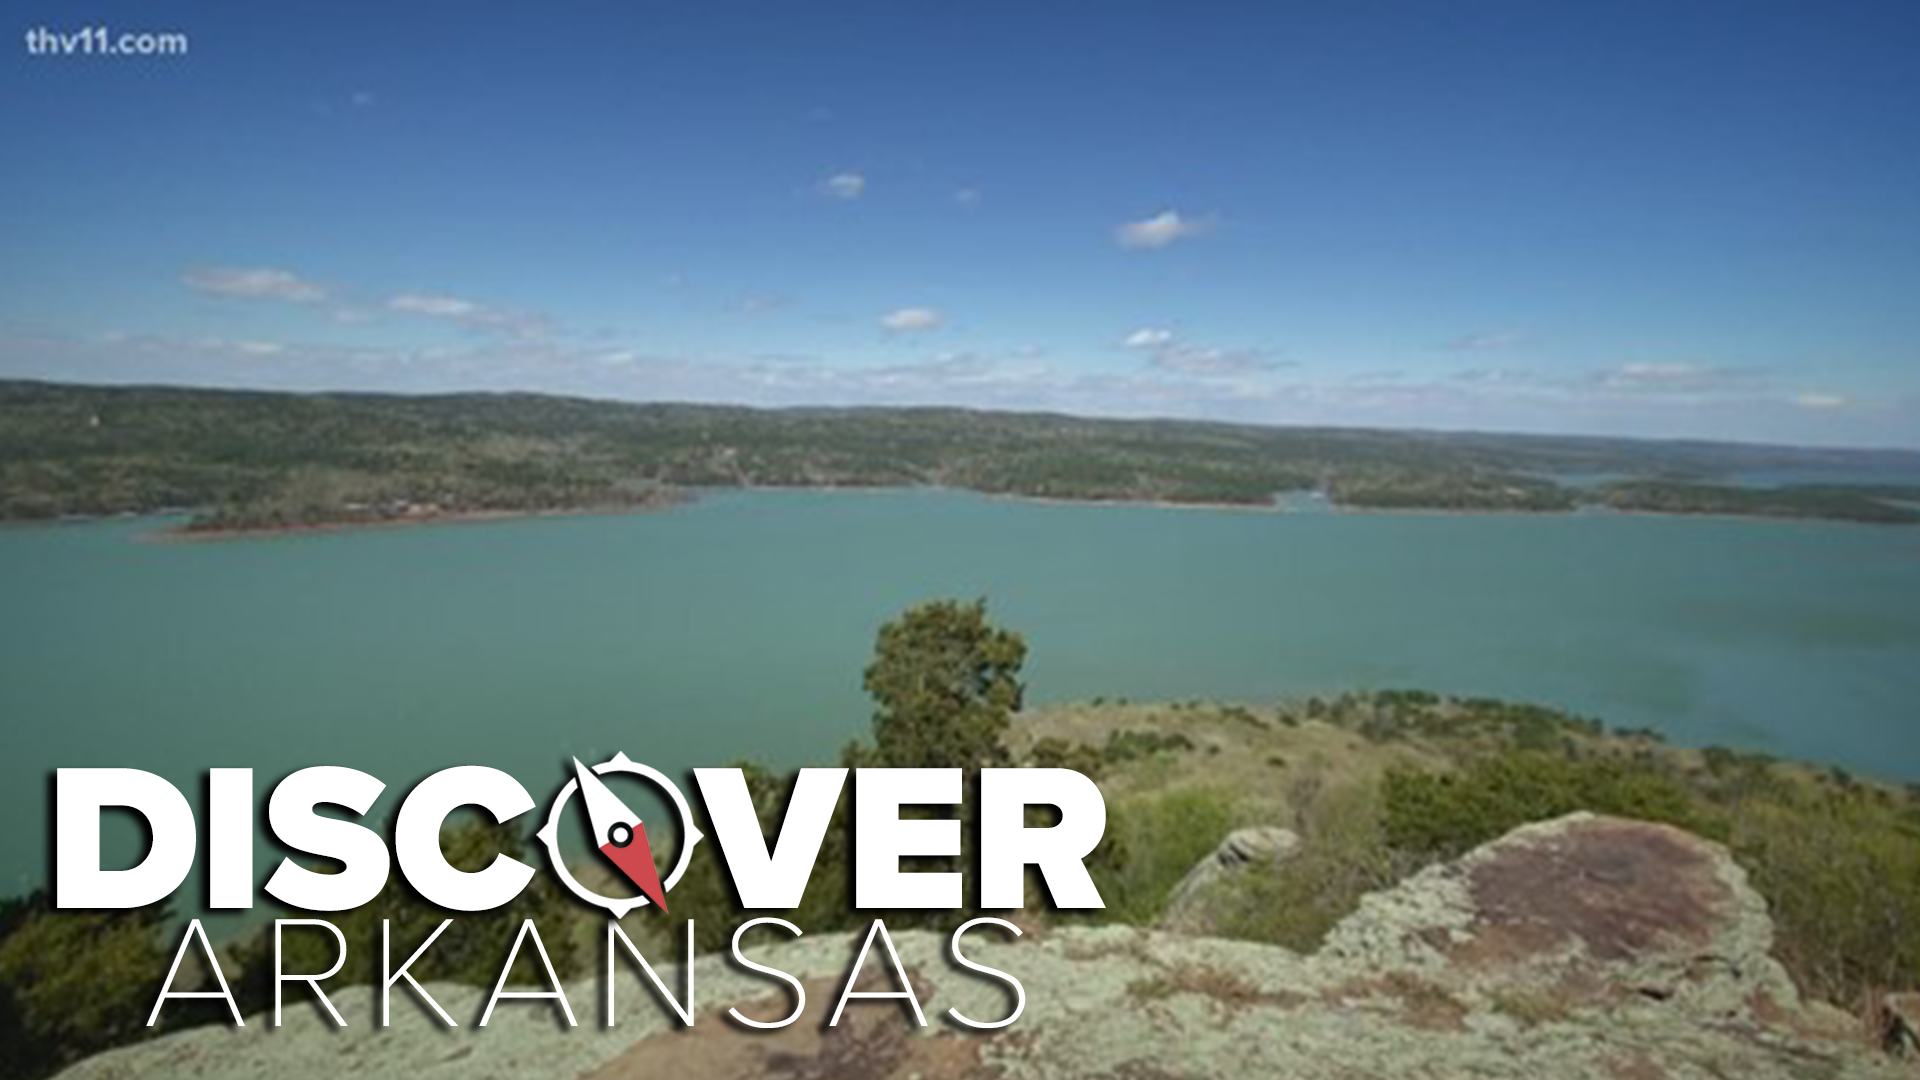 Hold onto your hat, because Ashley King is headed to a very windy Greers Ferry Lake, where you've got to have a boat, or know someone who does, to discover Arkansas.